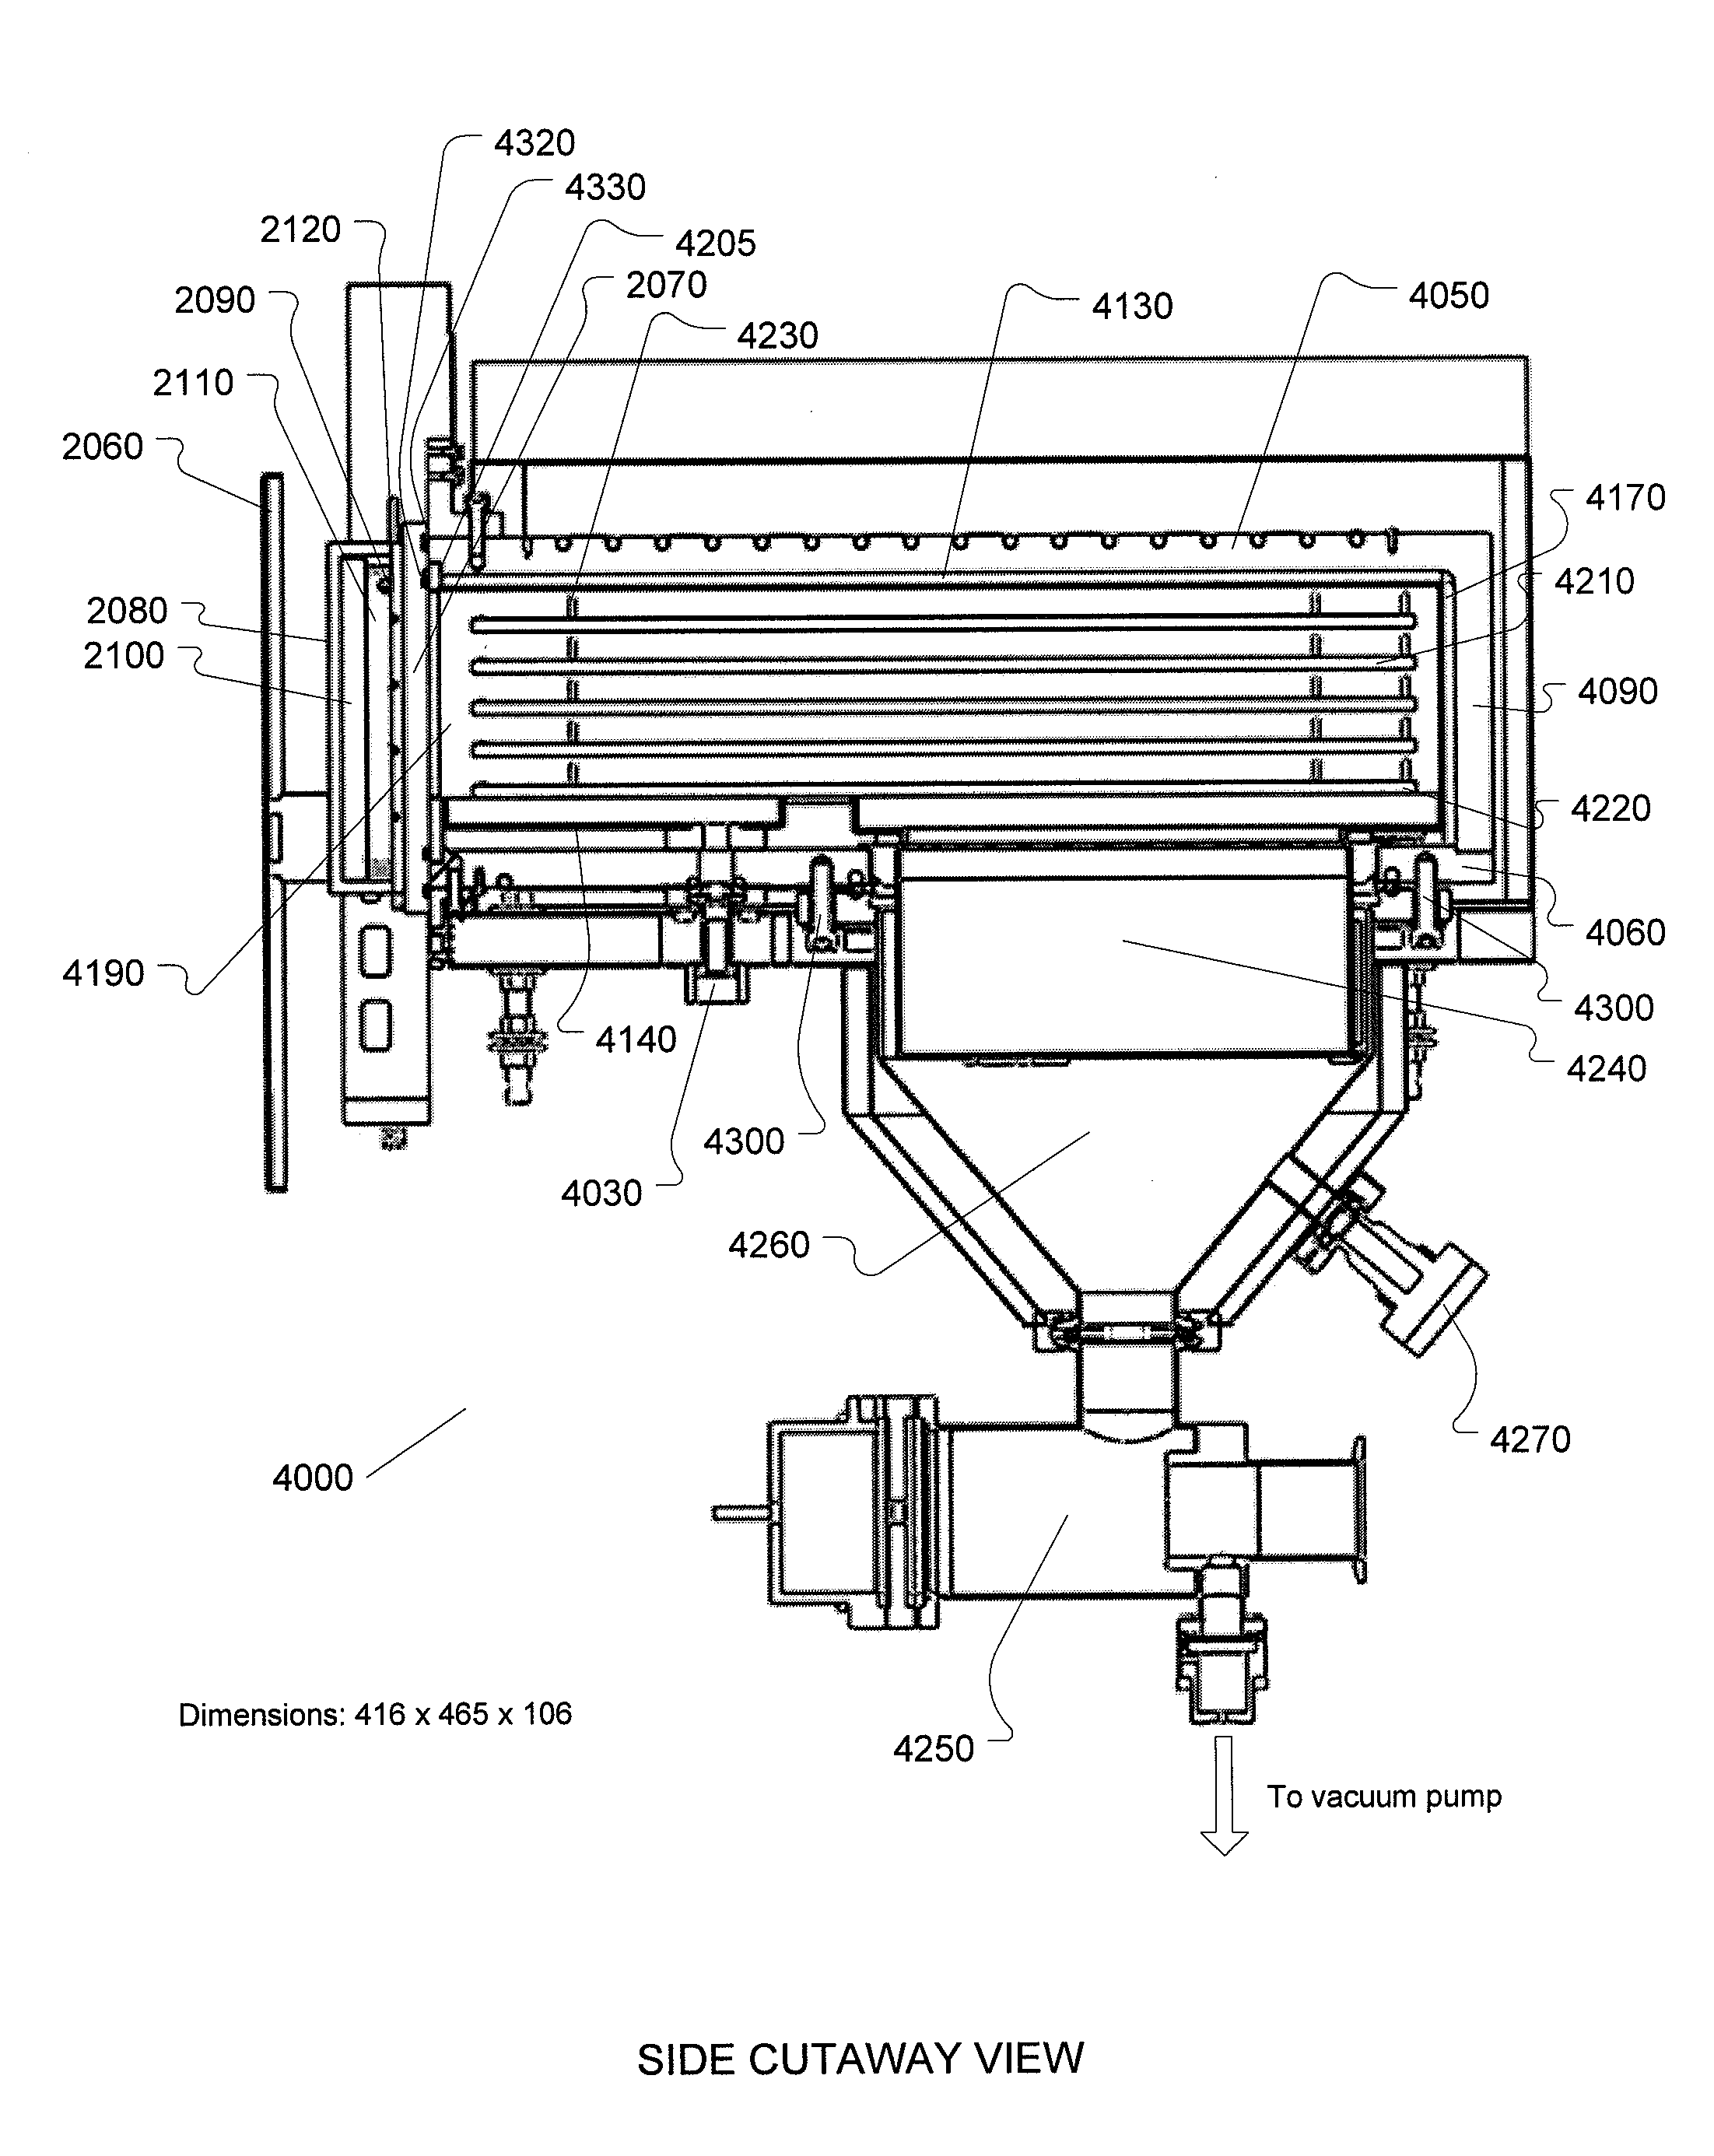 Reaction chamber with removable liner